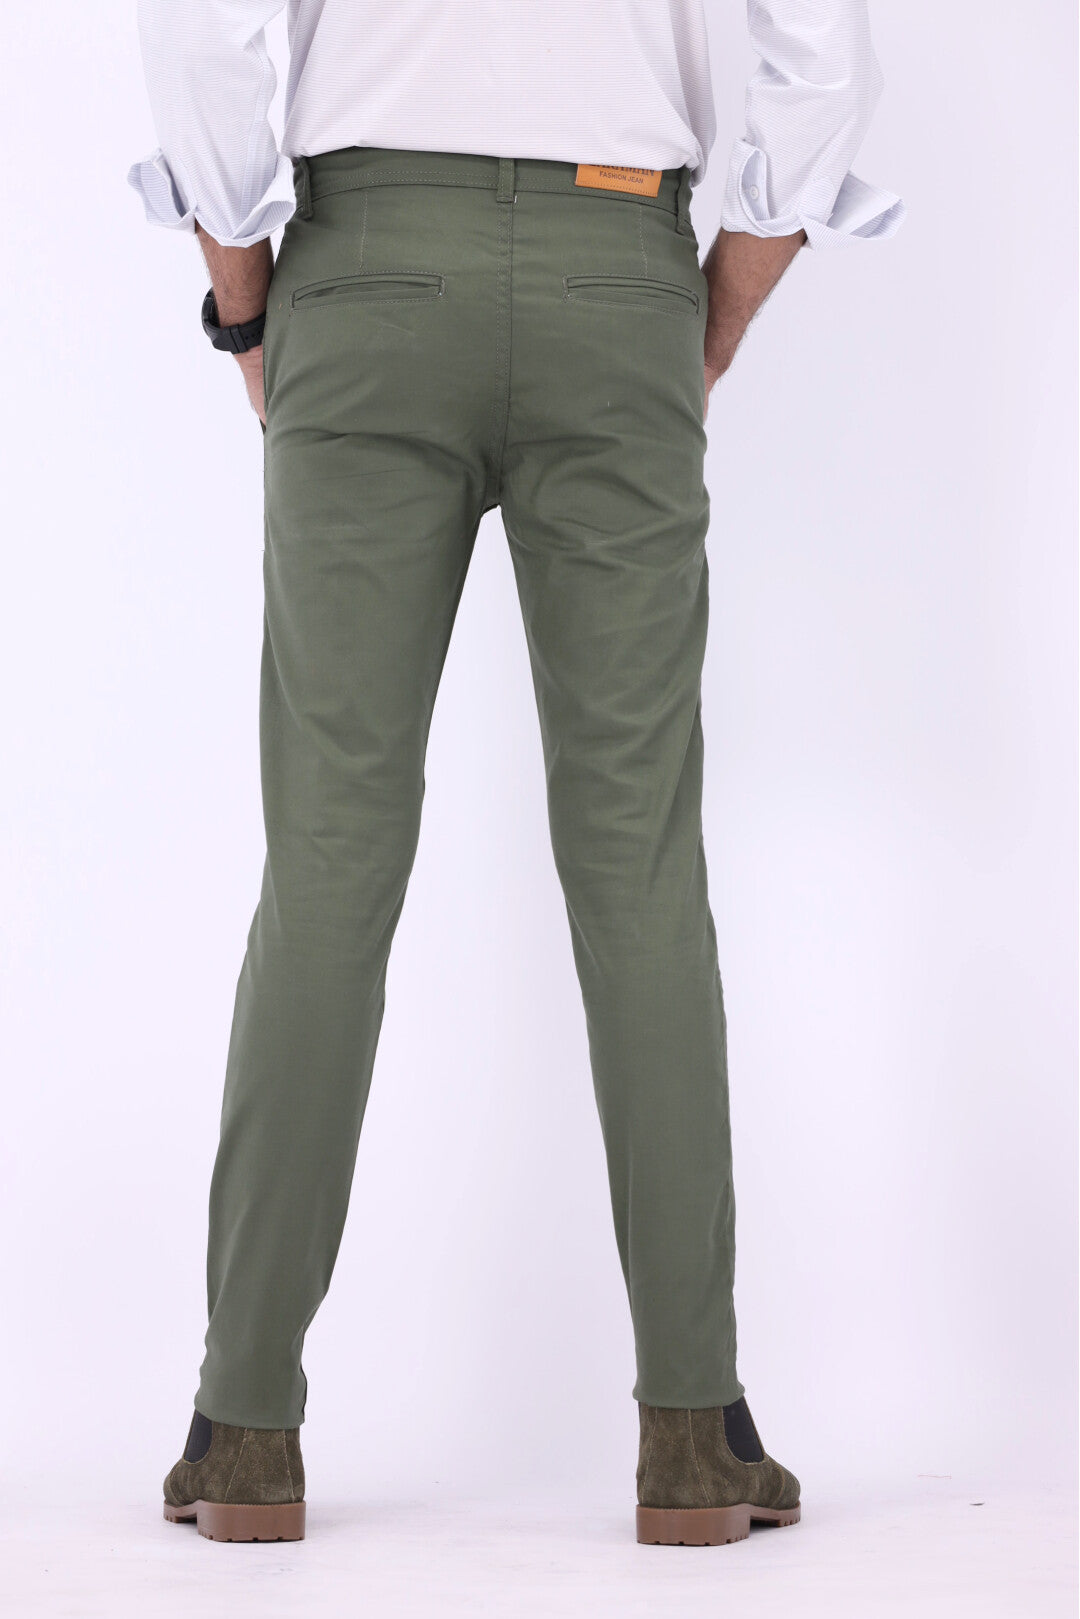 FT Cotton Chinos Pant - Green